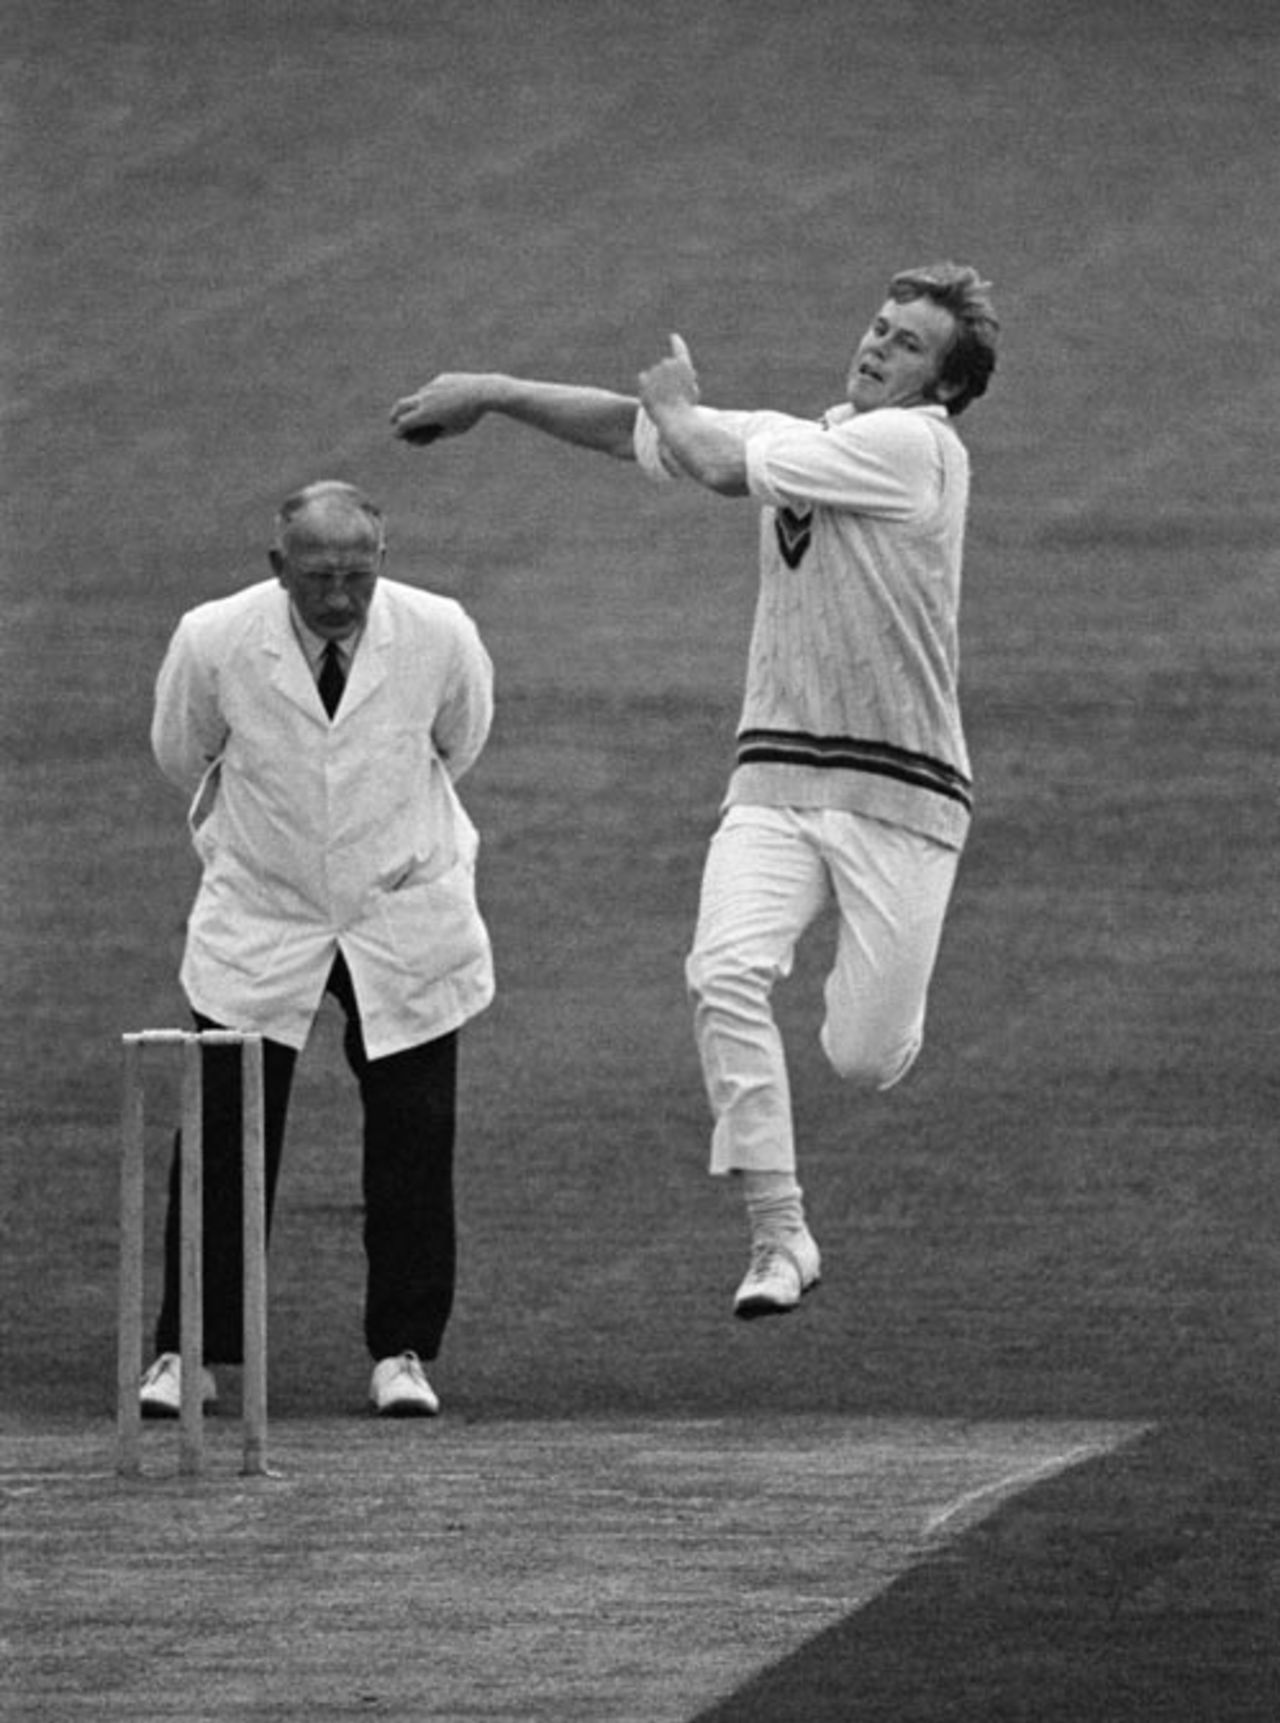 Mike Procter bowling as umpire Tom Spencer looks on, Gloucestershire v Northamptonshire, County Ground, Northampton, 21 June 1971